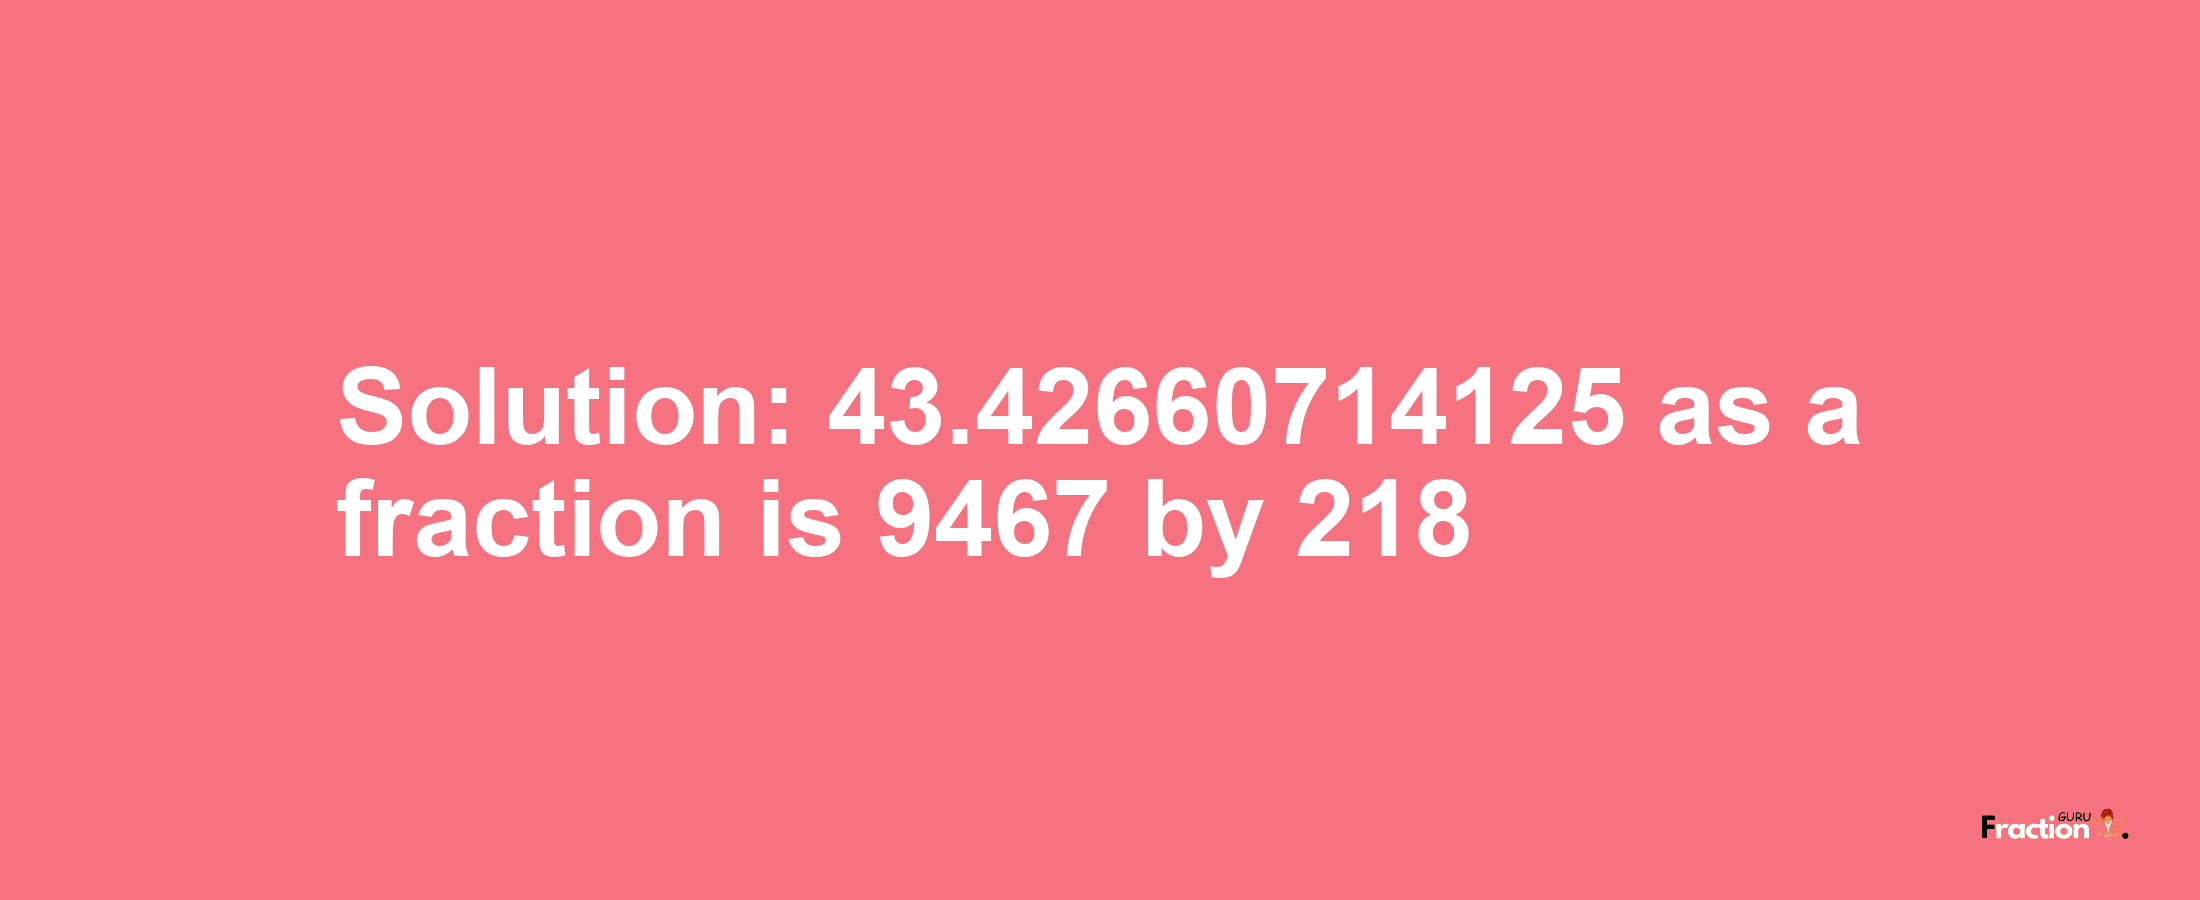 Solution:43.42660714125 as a fraction is 9467/218